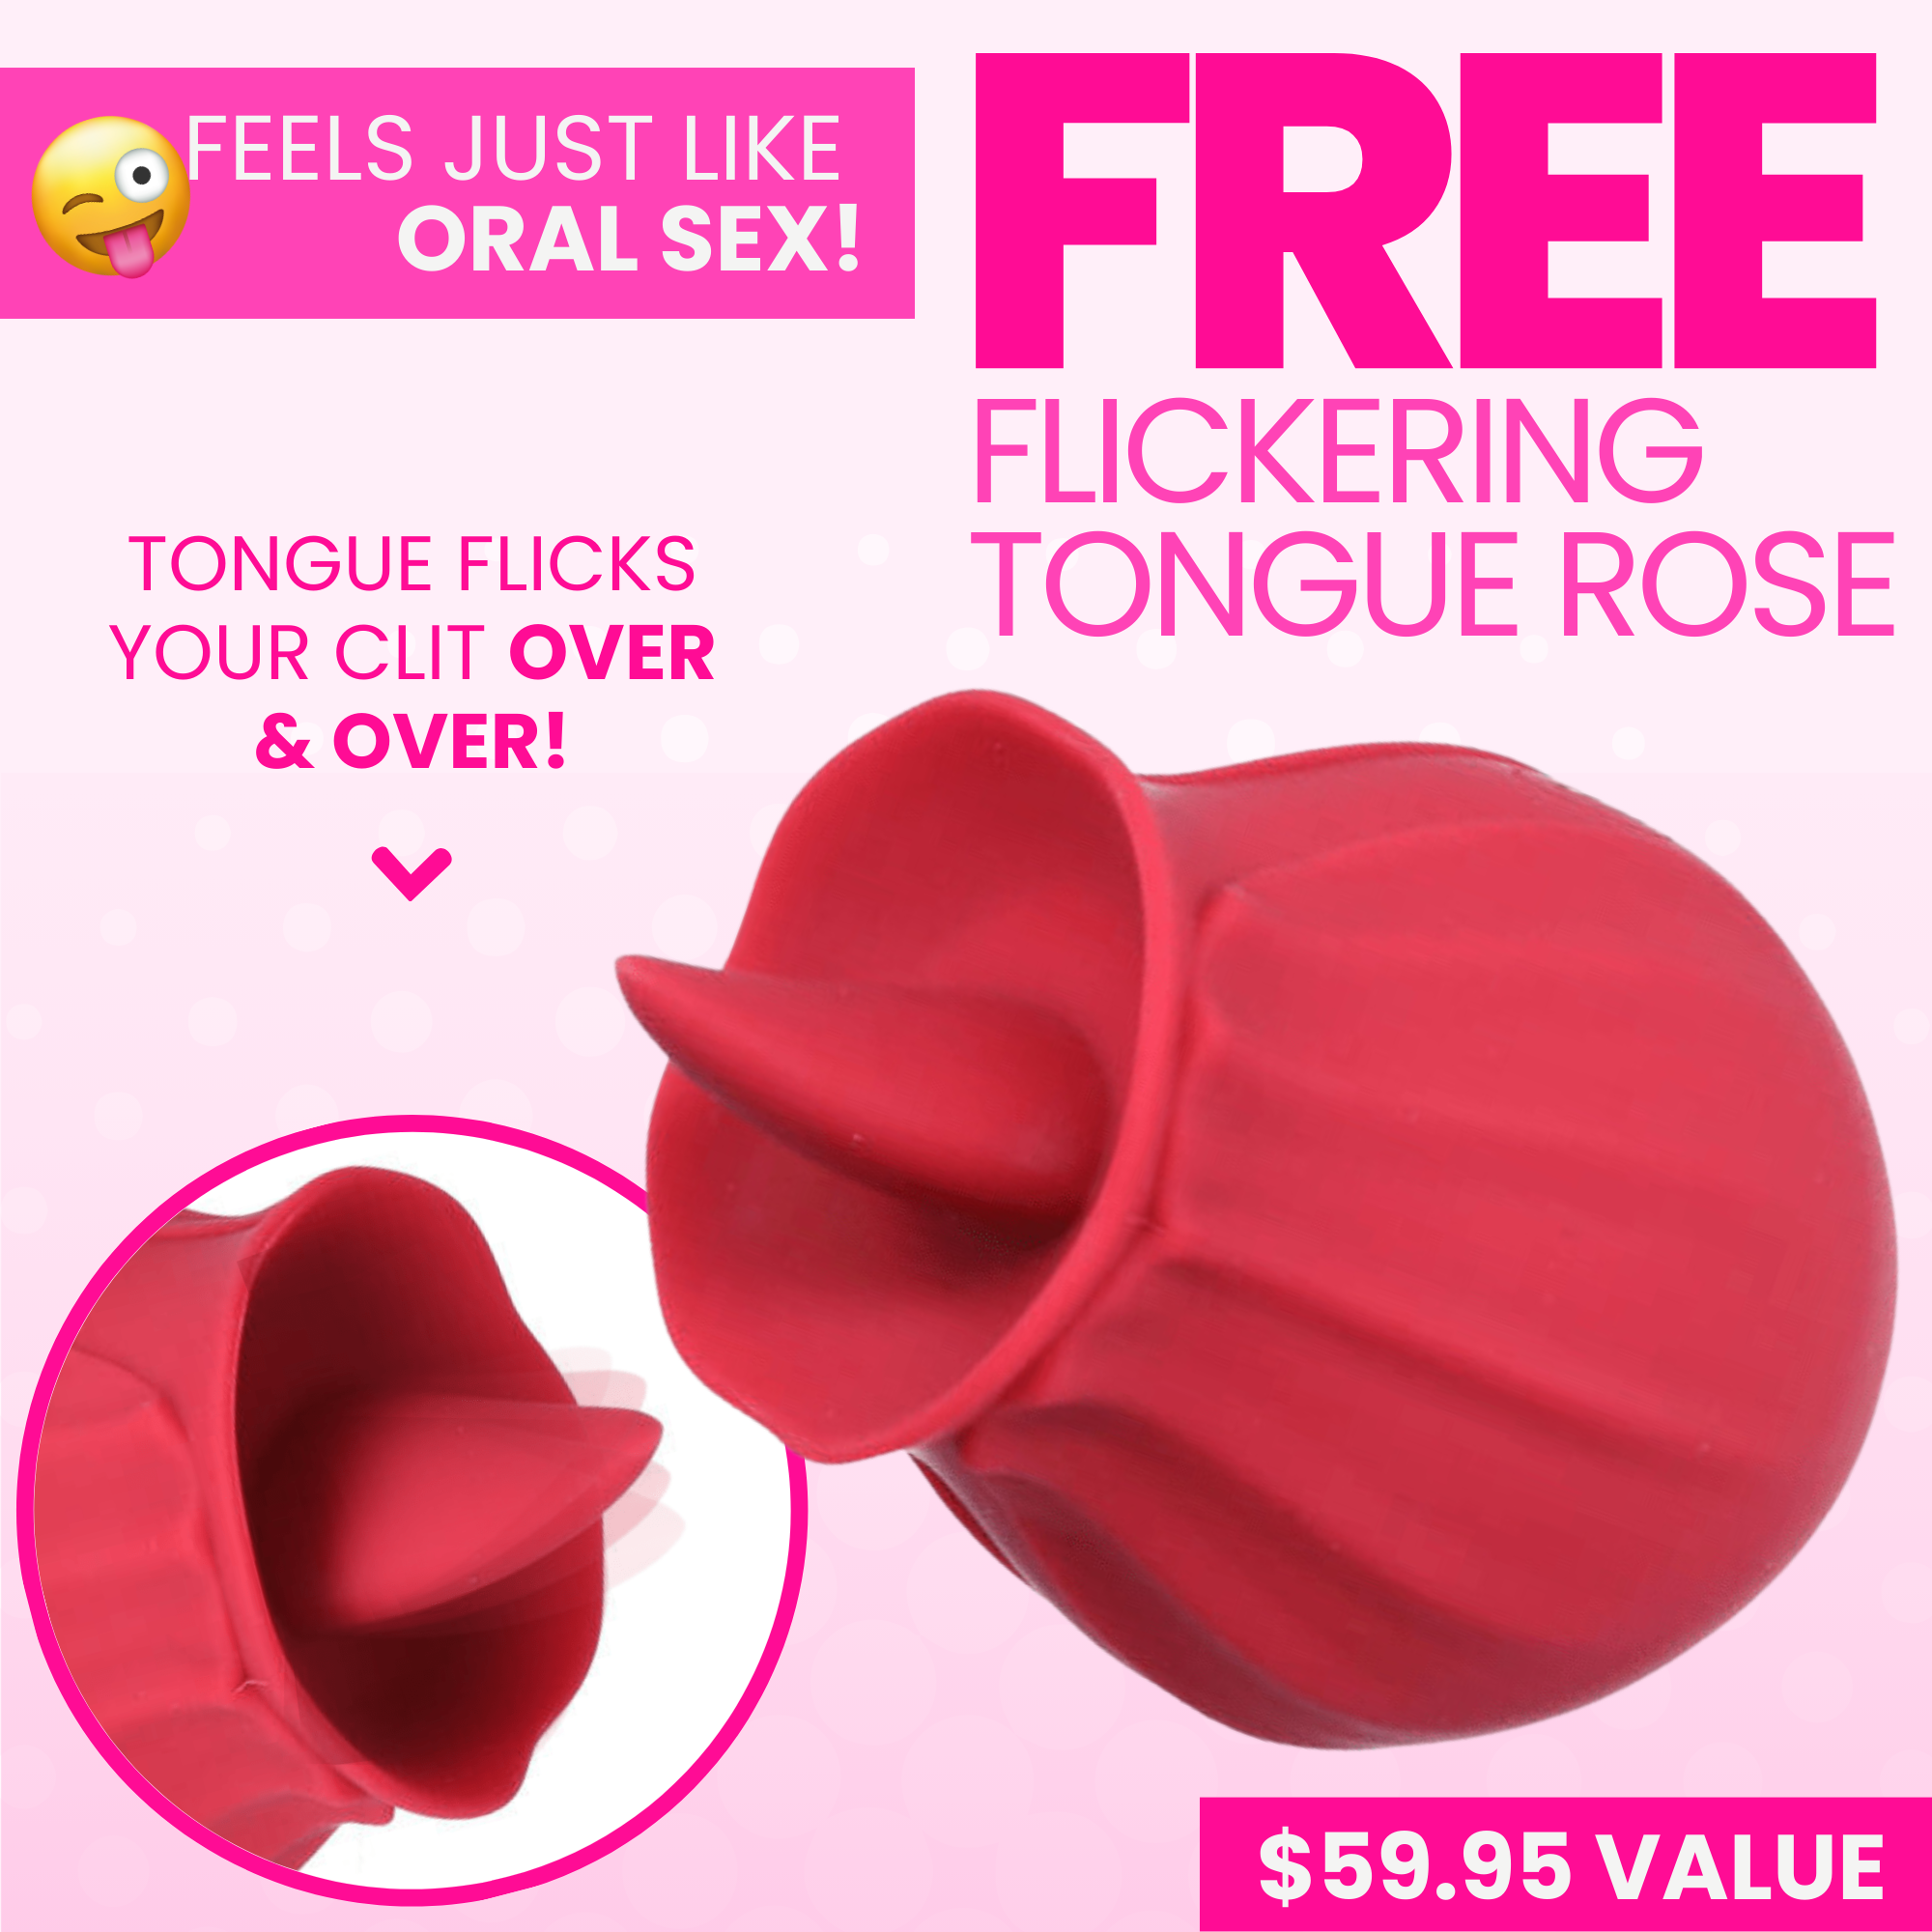 FREE Bhava Rechargeable Flickering Tongue Rose in Red - Add To Cart